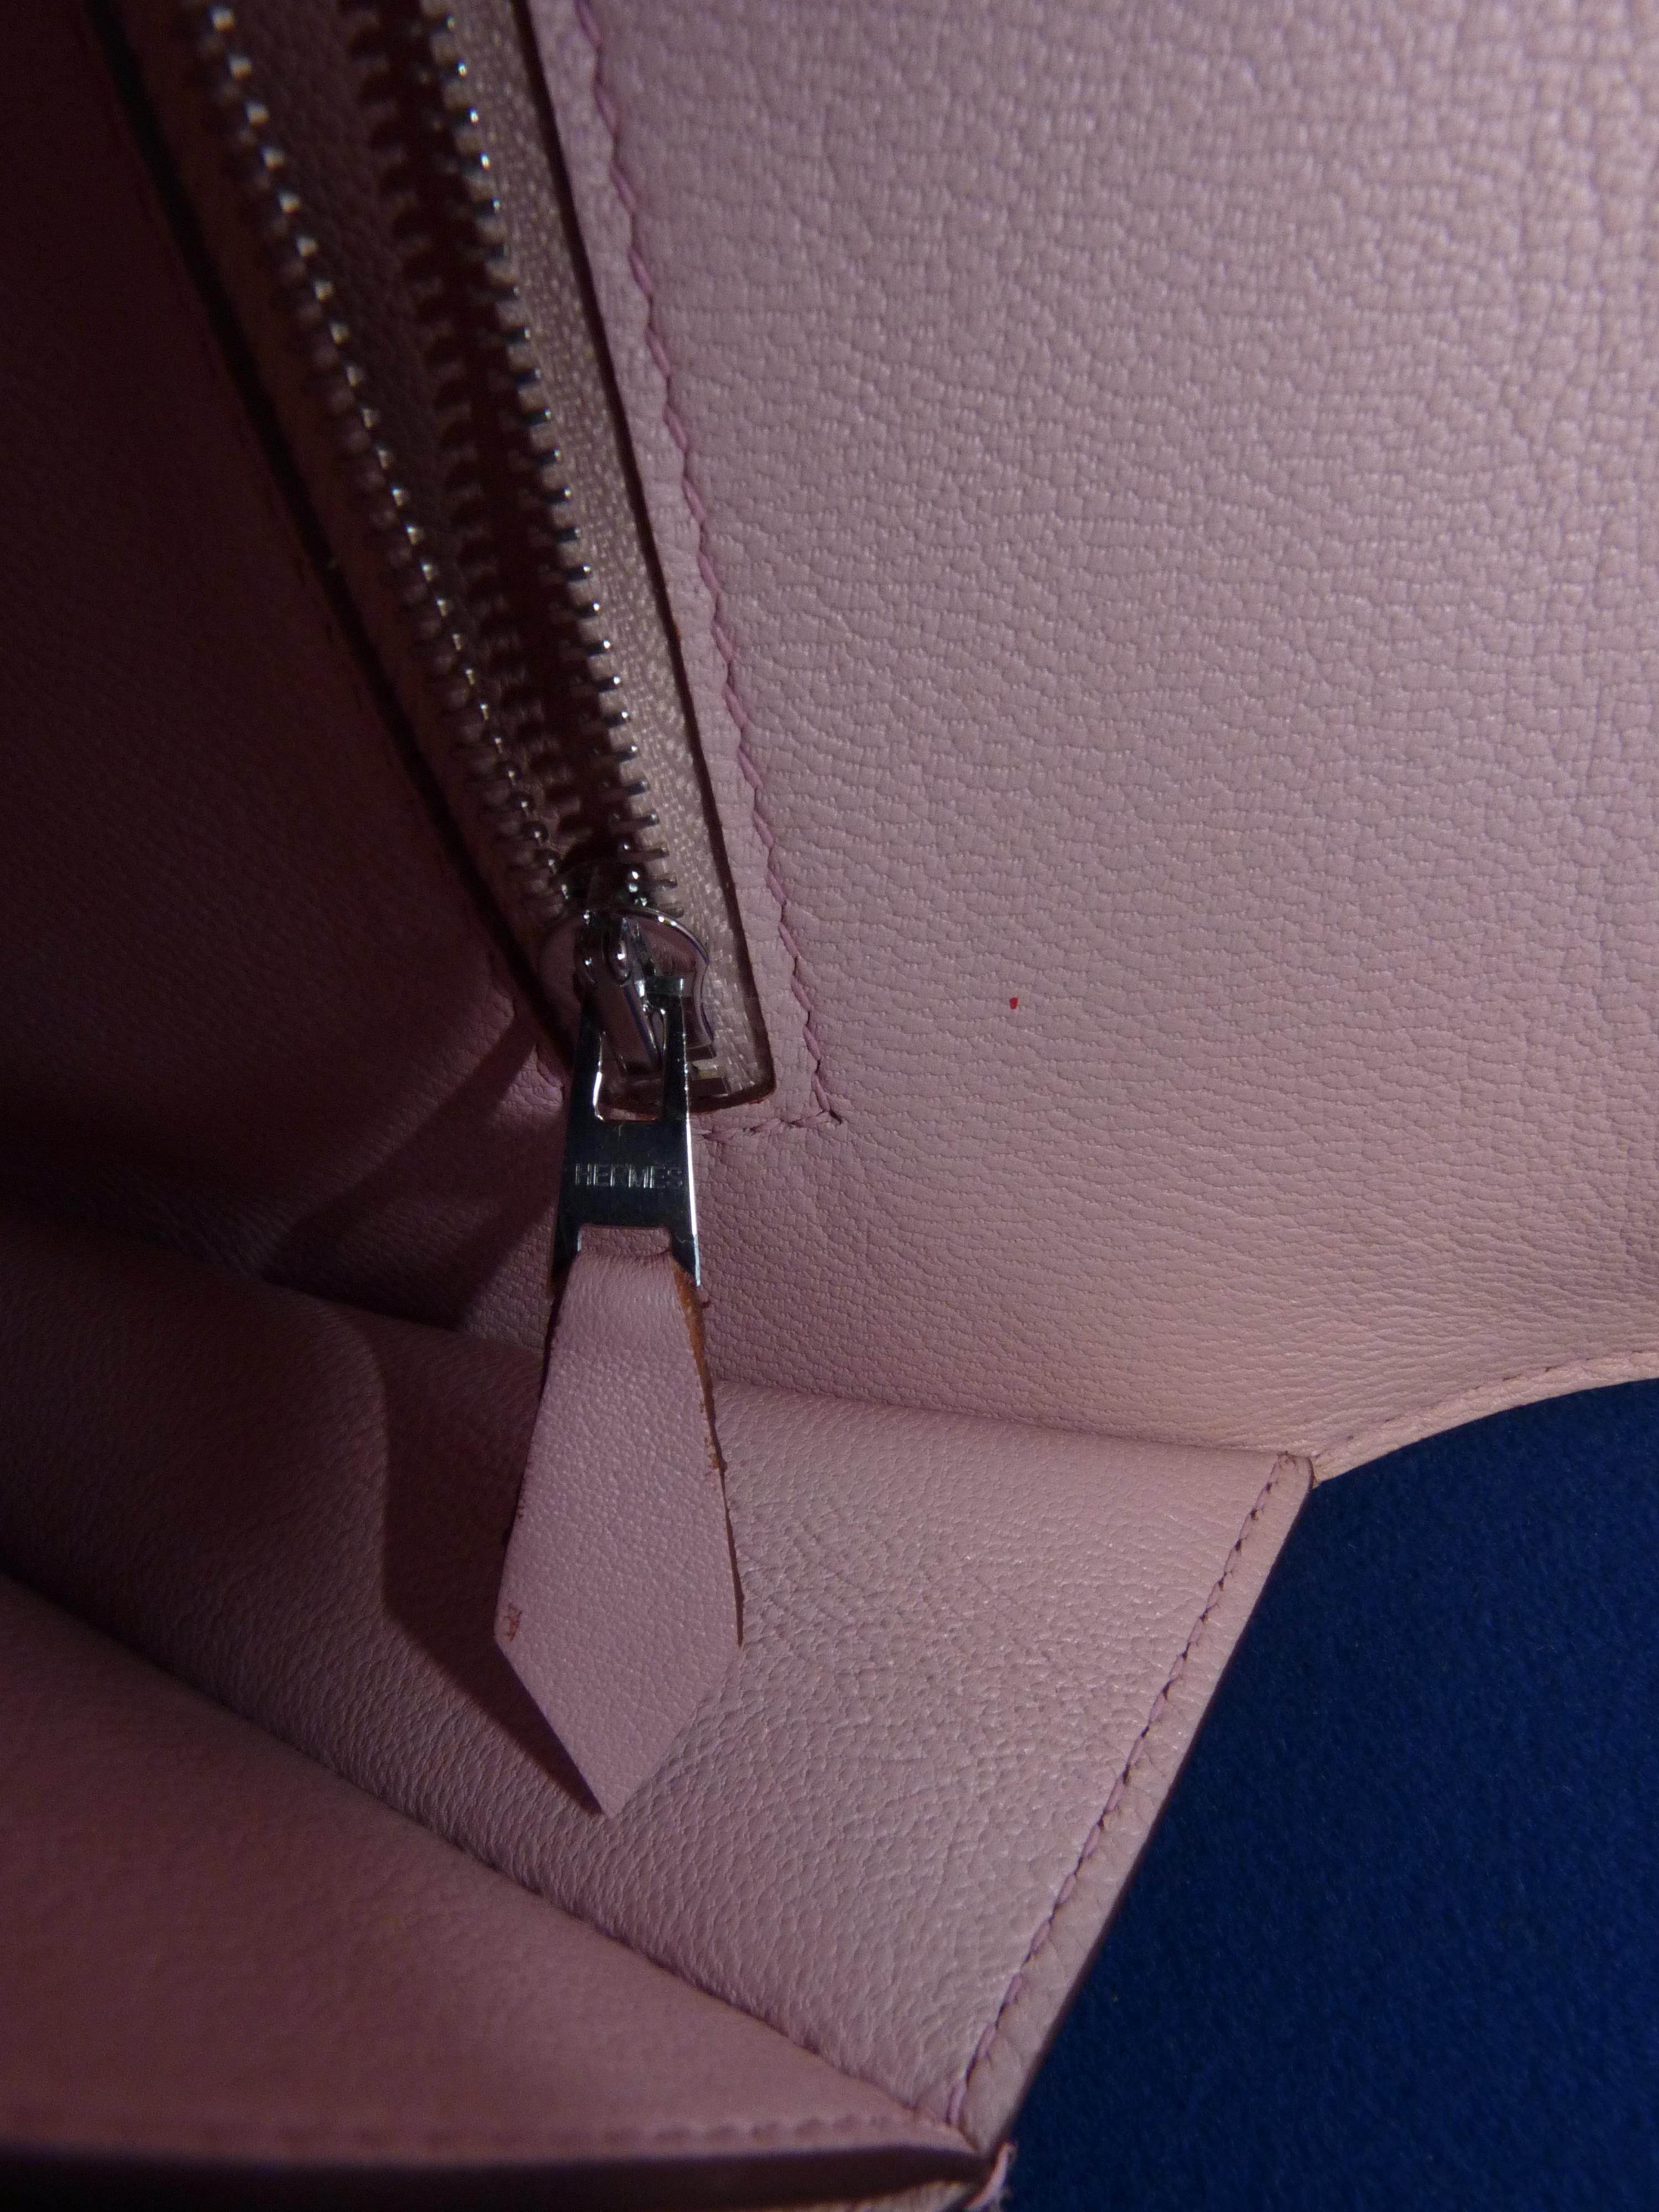 Hermes Constance handbag 24cm in pink with box and bag etc.Marked GLY745 - Image 7 of 11